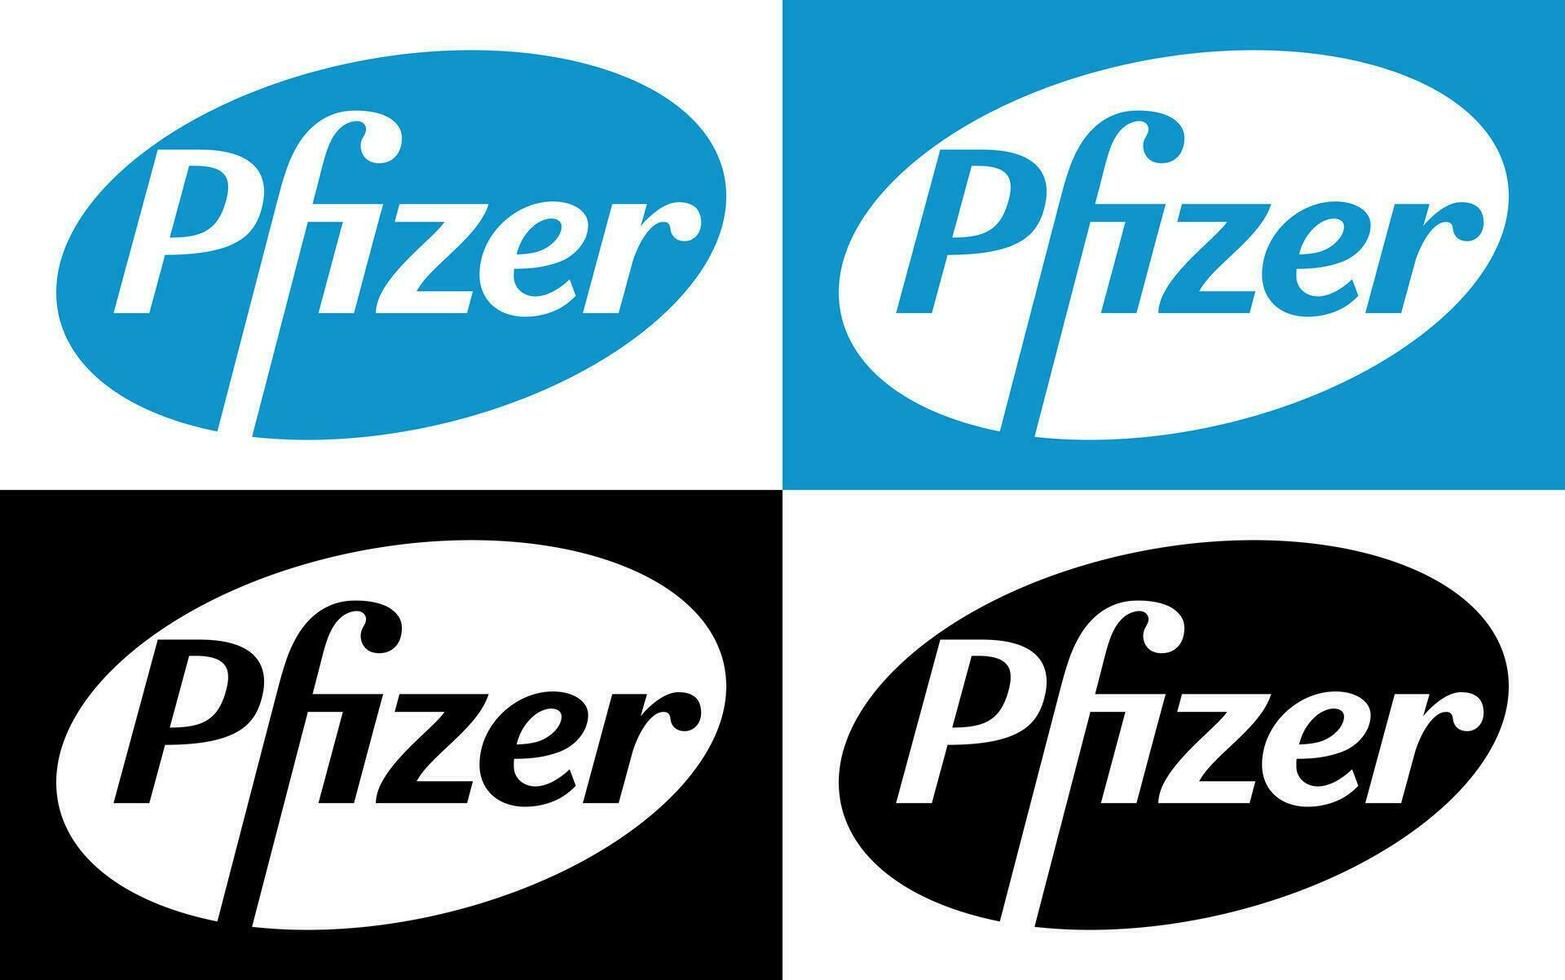 Pfizer Vector Logo - Latest Blue and Black Color Silhouette Set - American pharmaceutical corporation that research and development vaccines and medical products.